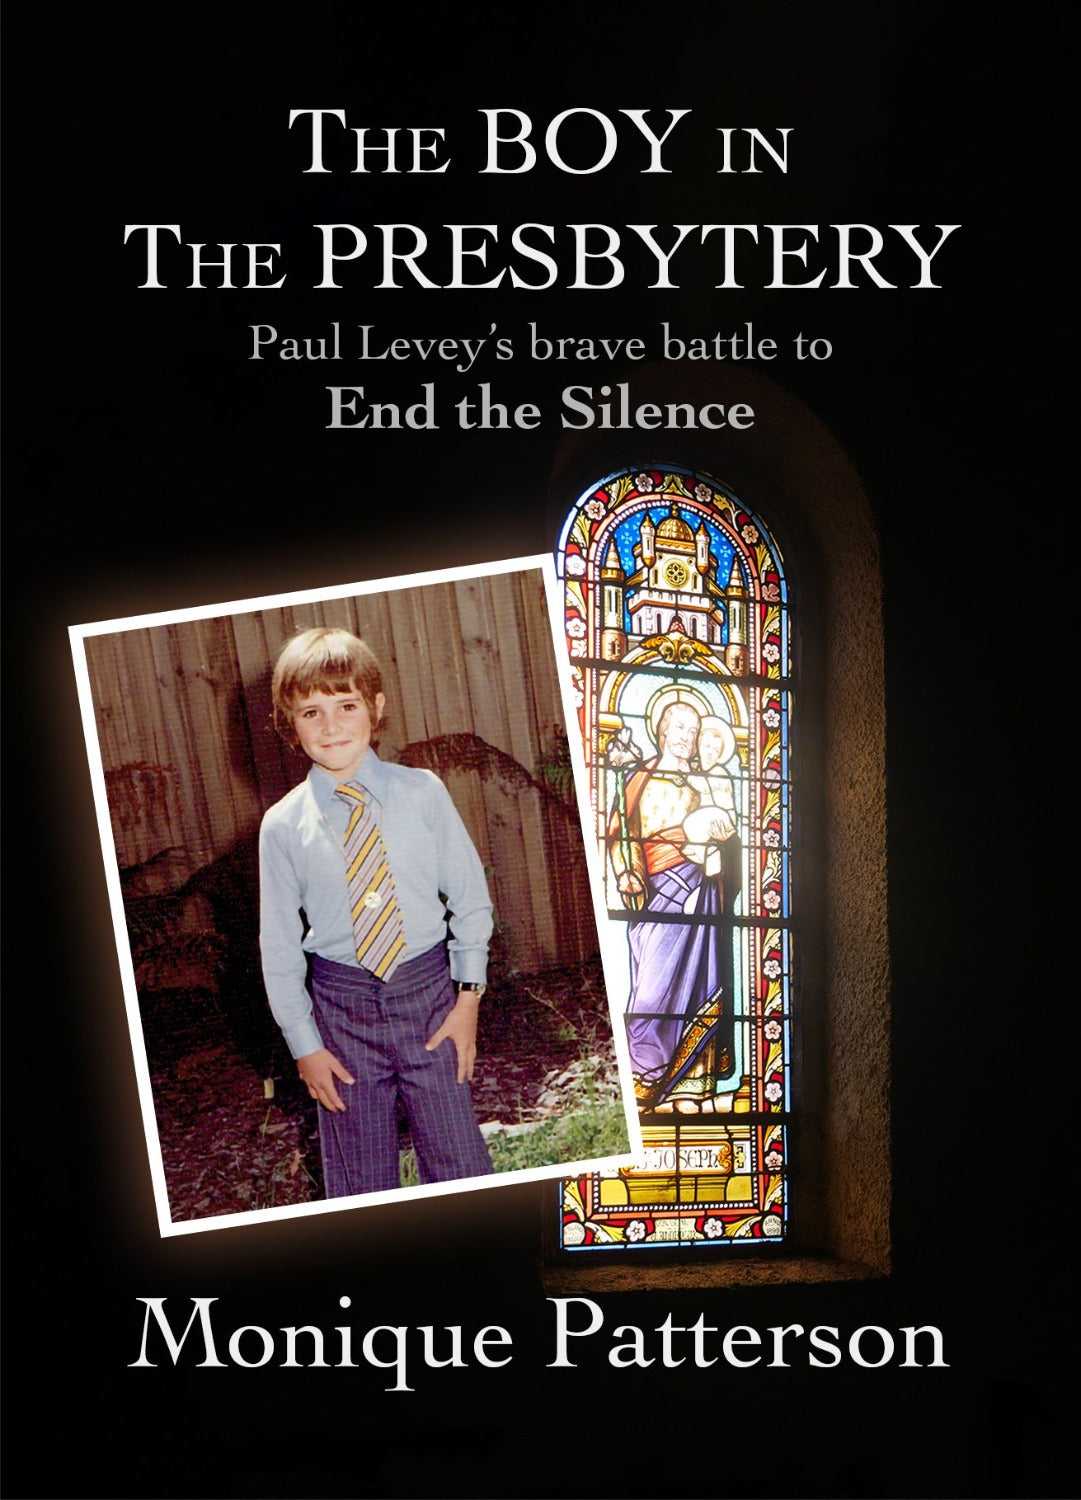 The Boy in the Presbytery: Paul Levey's brave battle to End the Silence